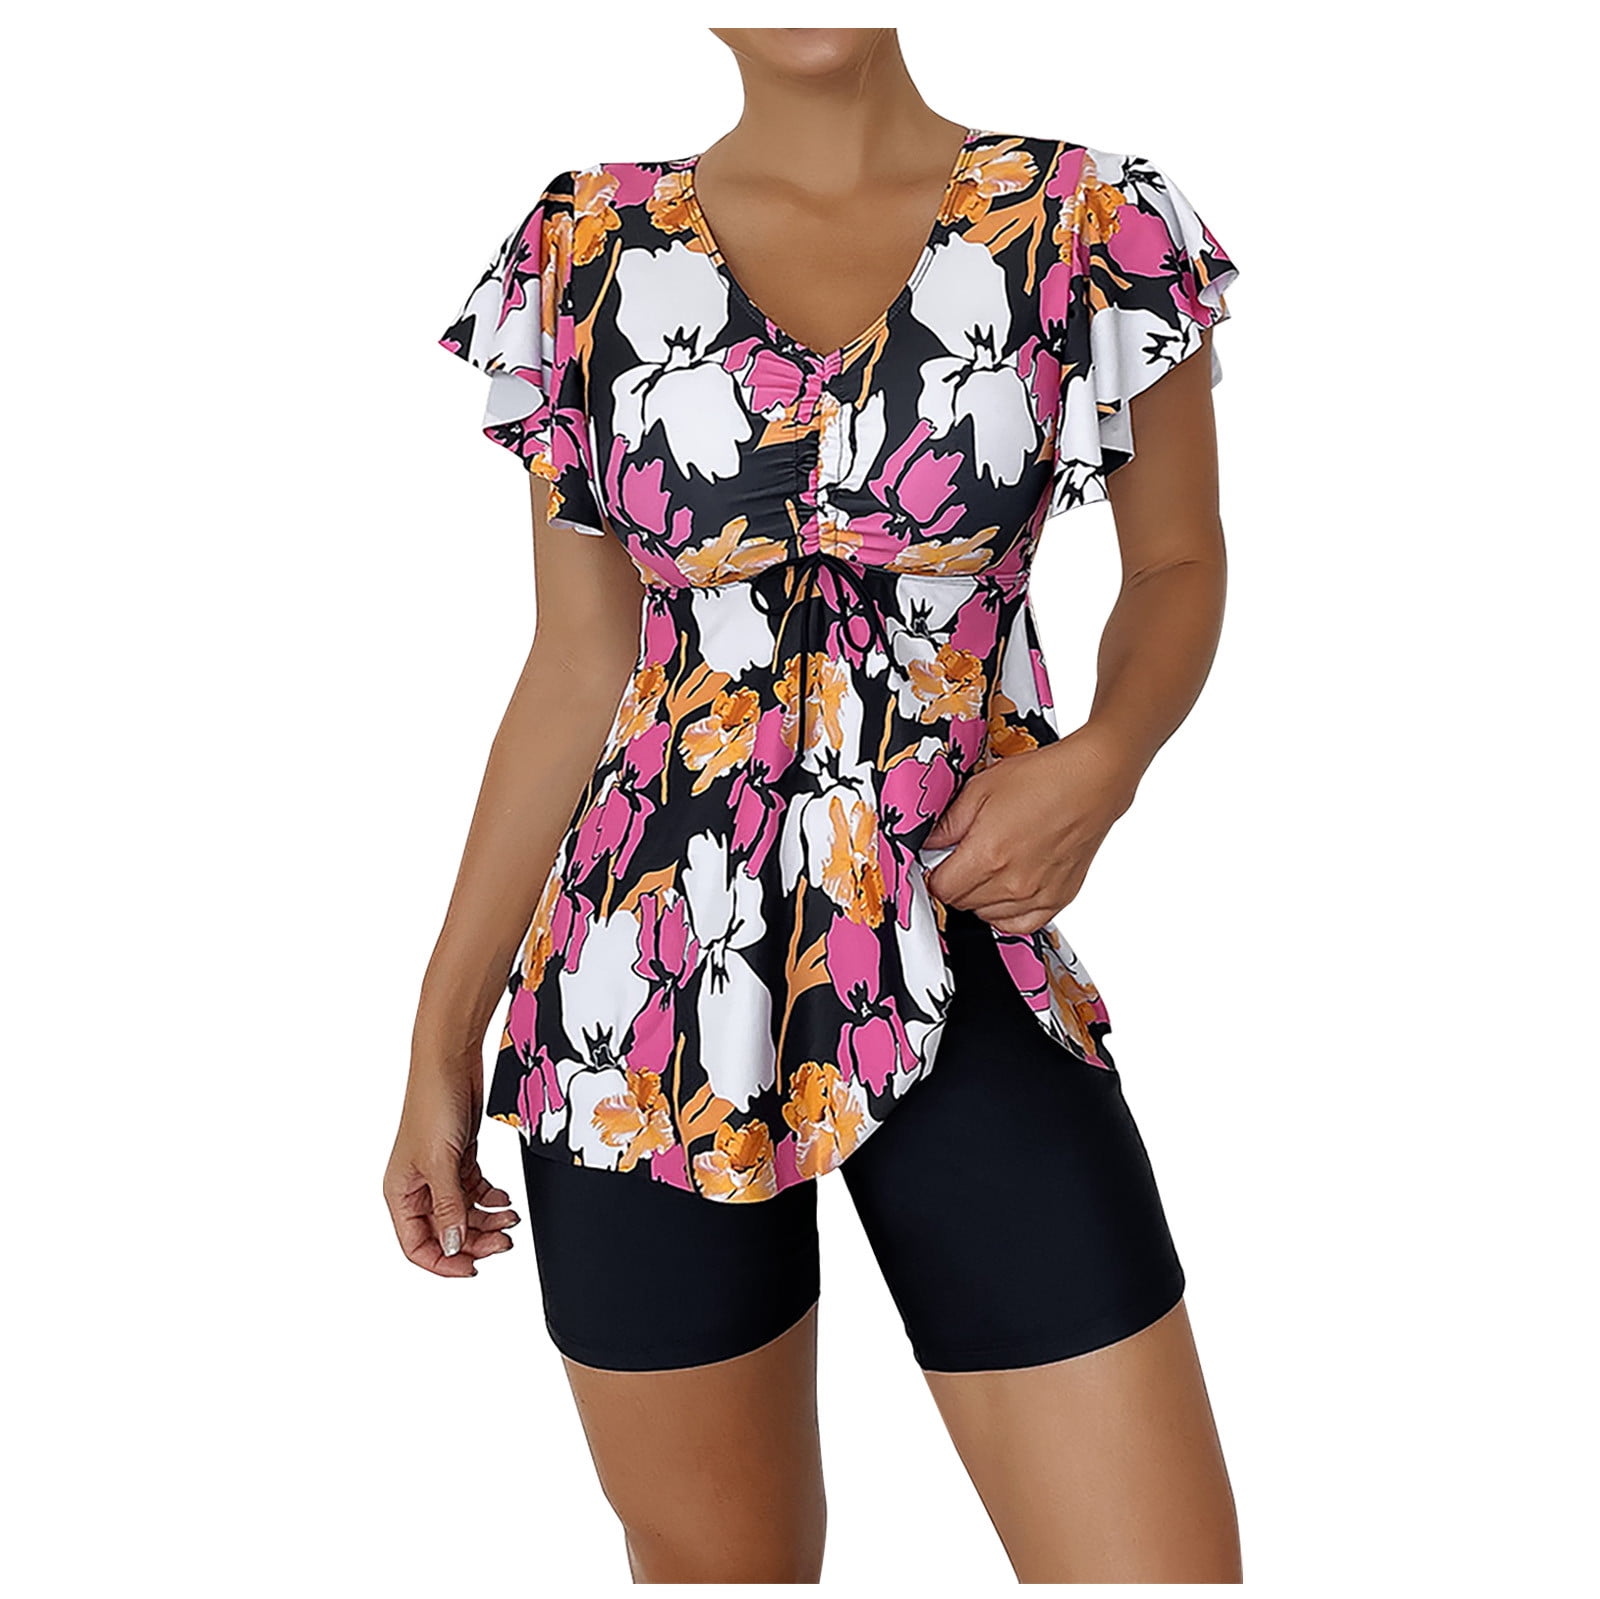 RQYYD Reduced Women's Floral Print Tankini Swimsuits Ruffled Flowy ...